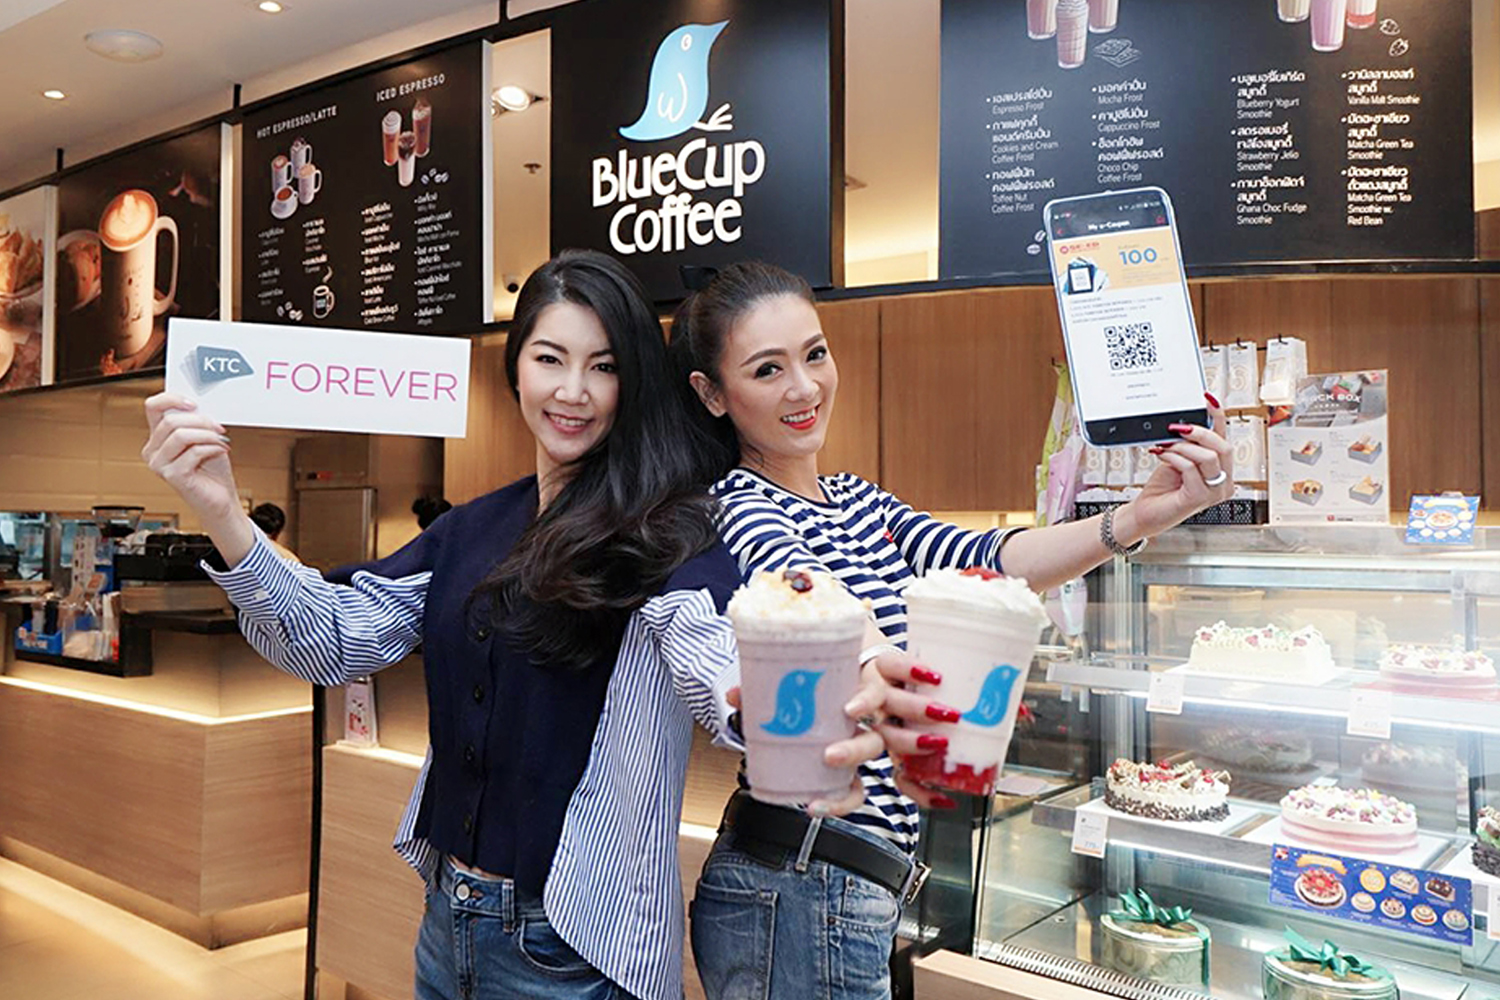 KTC lets cardmembers redeem KTC FOREVER points in exchange for refreshments at BlueCup Coffee.